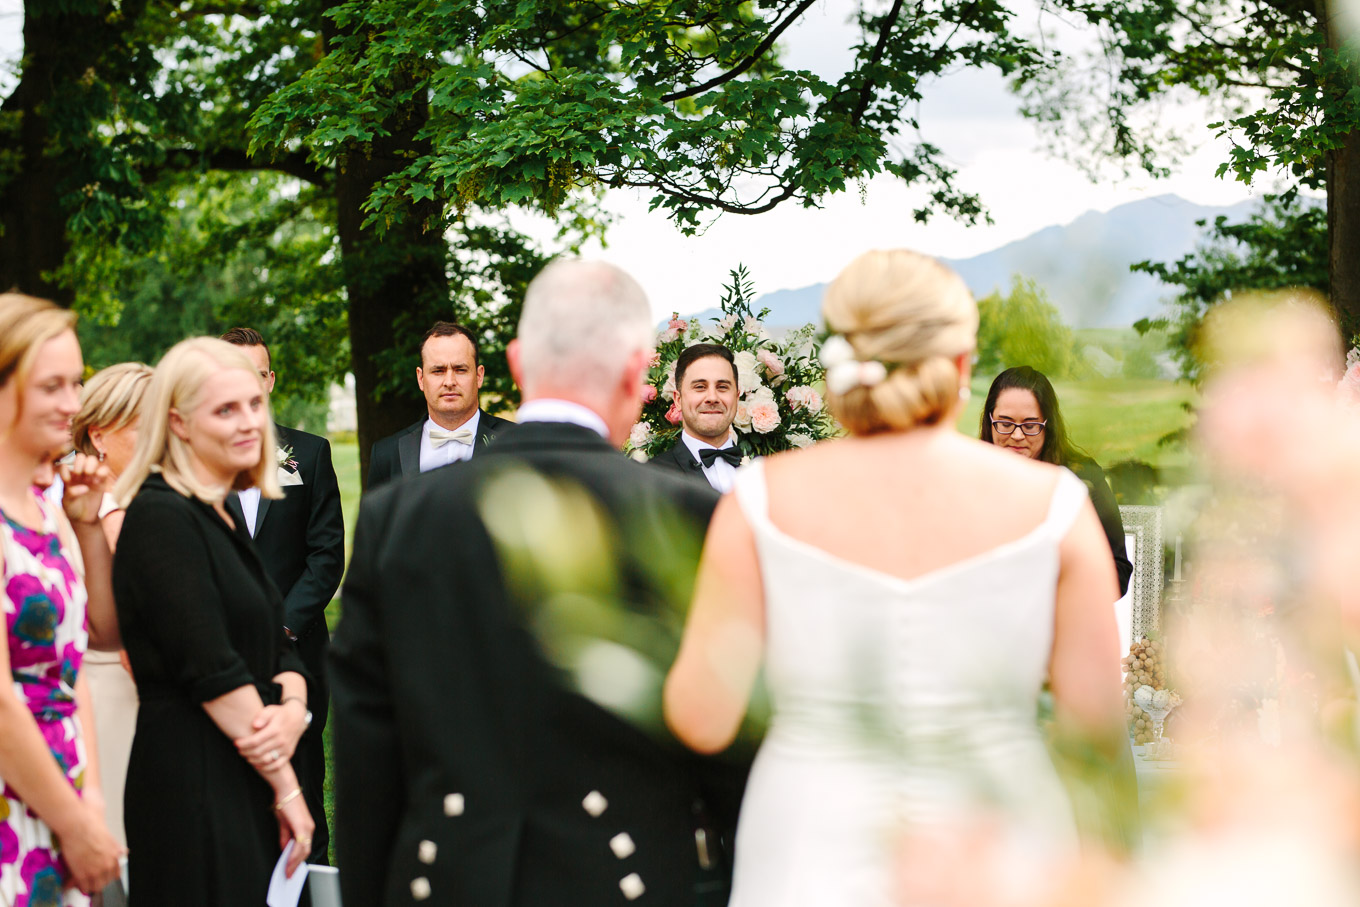 Groom seeing bride and her father walking down the aisle. Millbrook Resort Queenstown New Zealand wedding by Mary Costa Photography | www.marycostaweddings.com